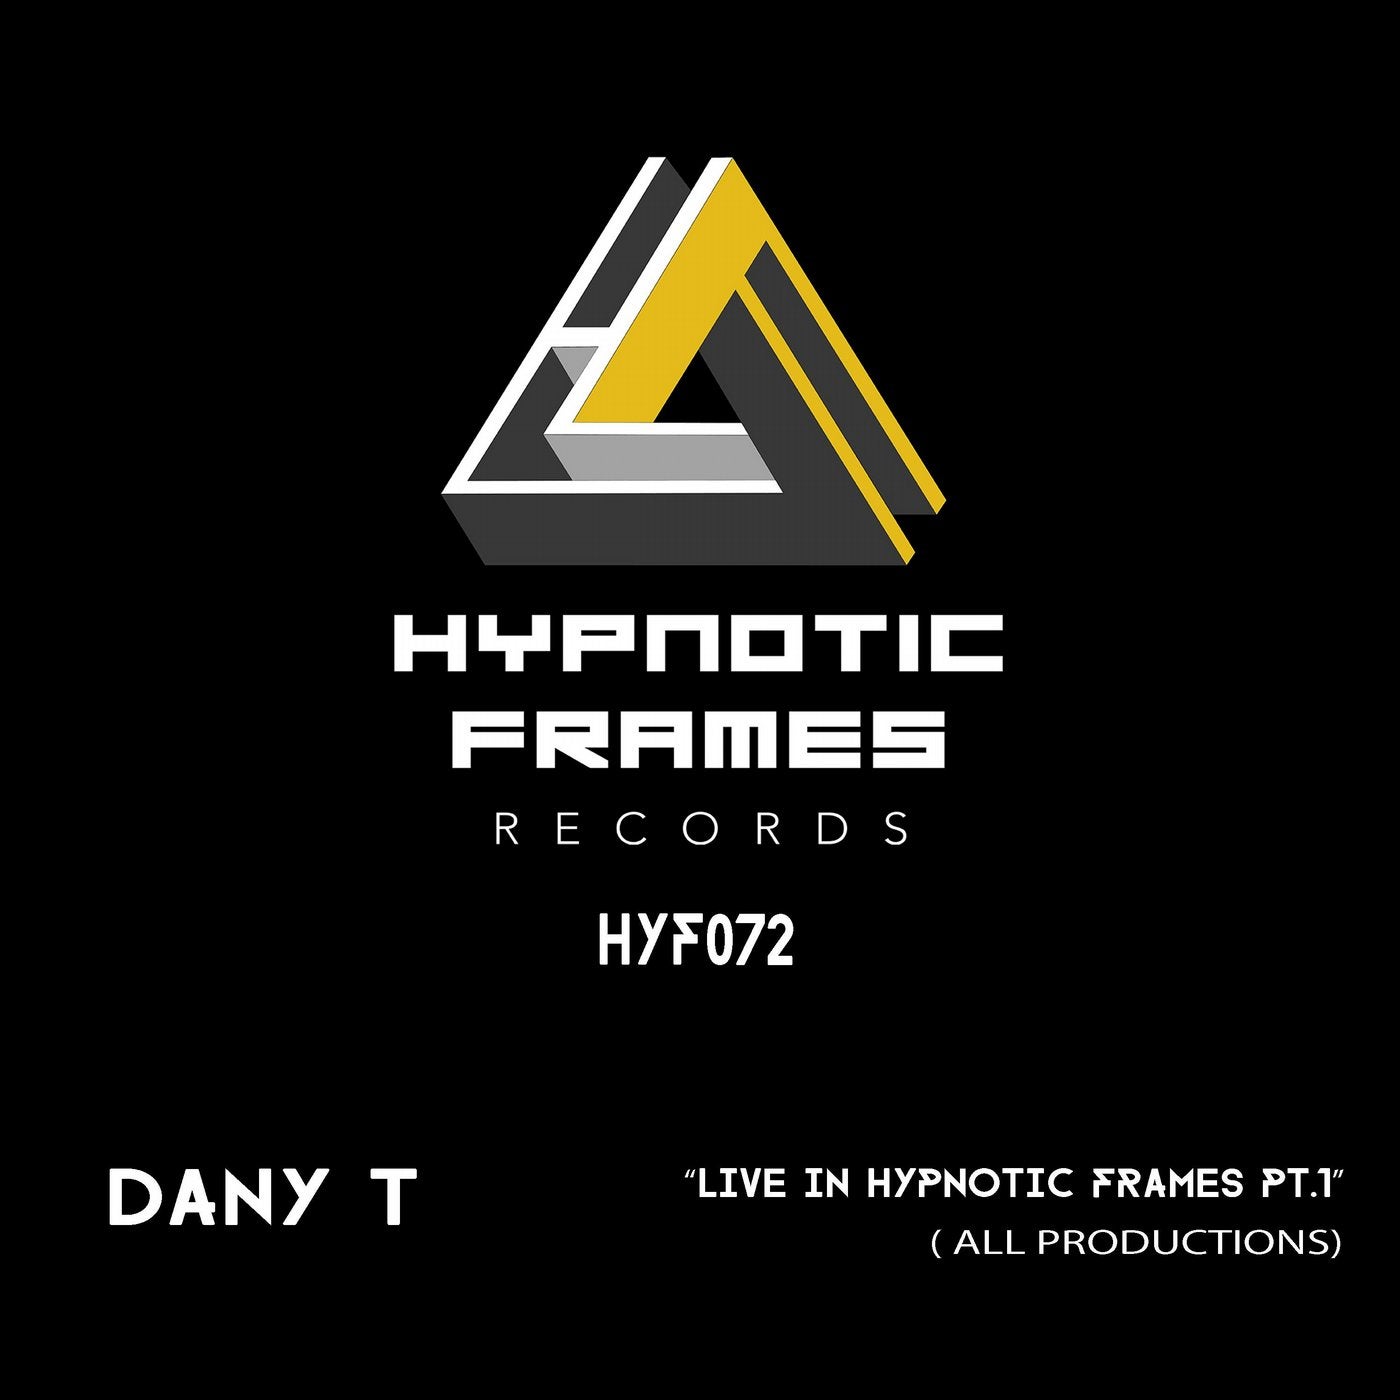 Live In Hypnotic Frames Pt.1 (All Productions)